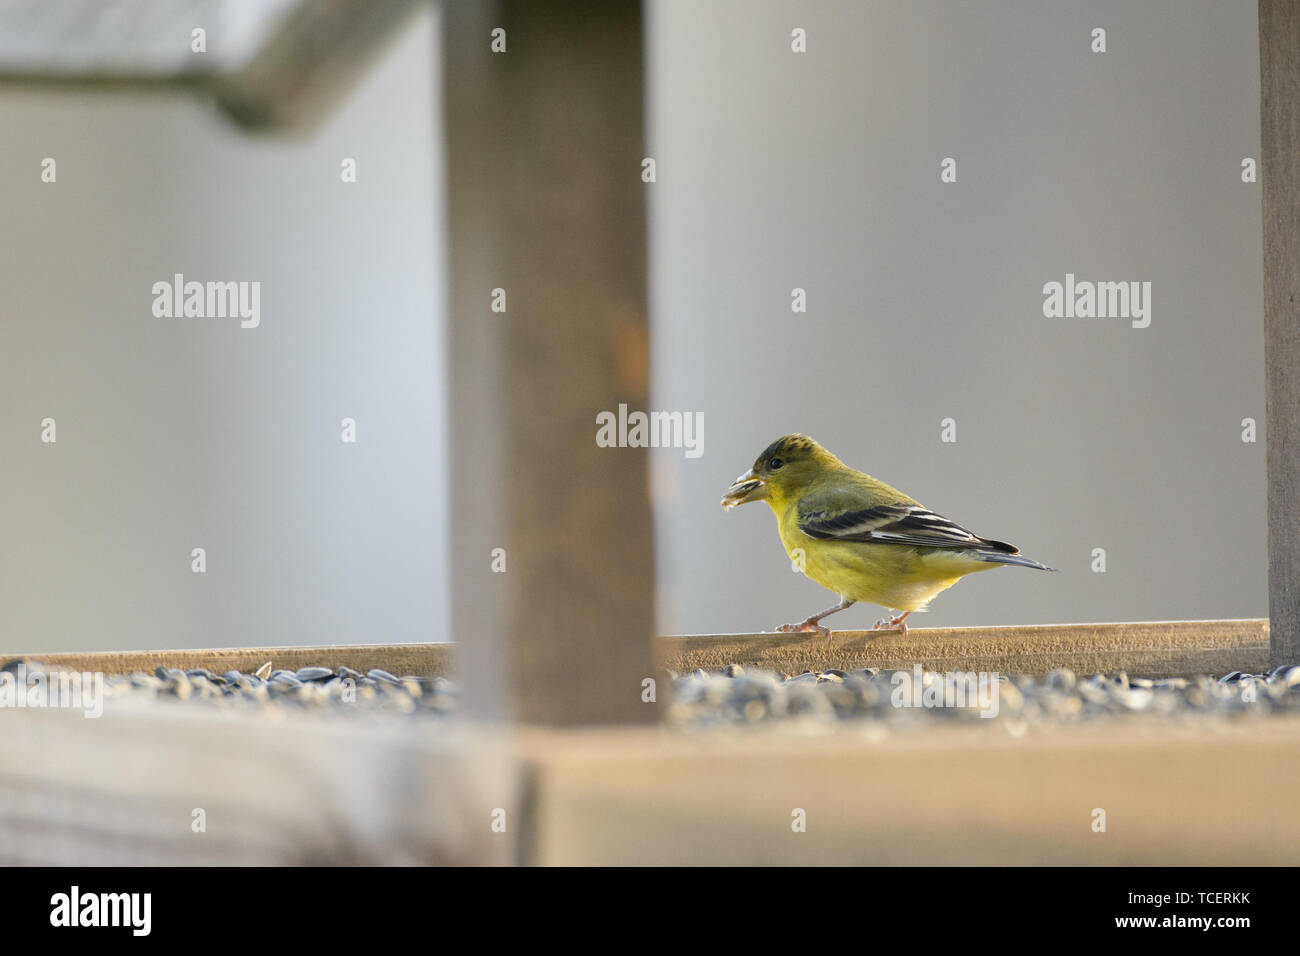 Back view of Arabian golden sparrow catching food standing on edge of wood bird box Stock Photo